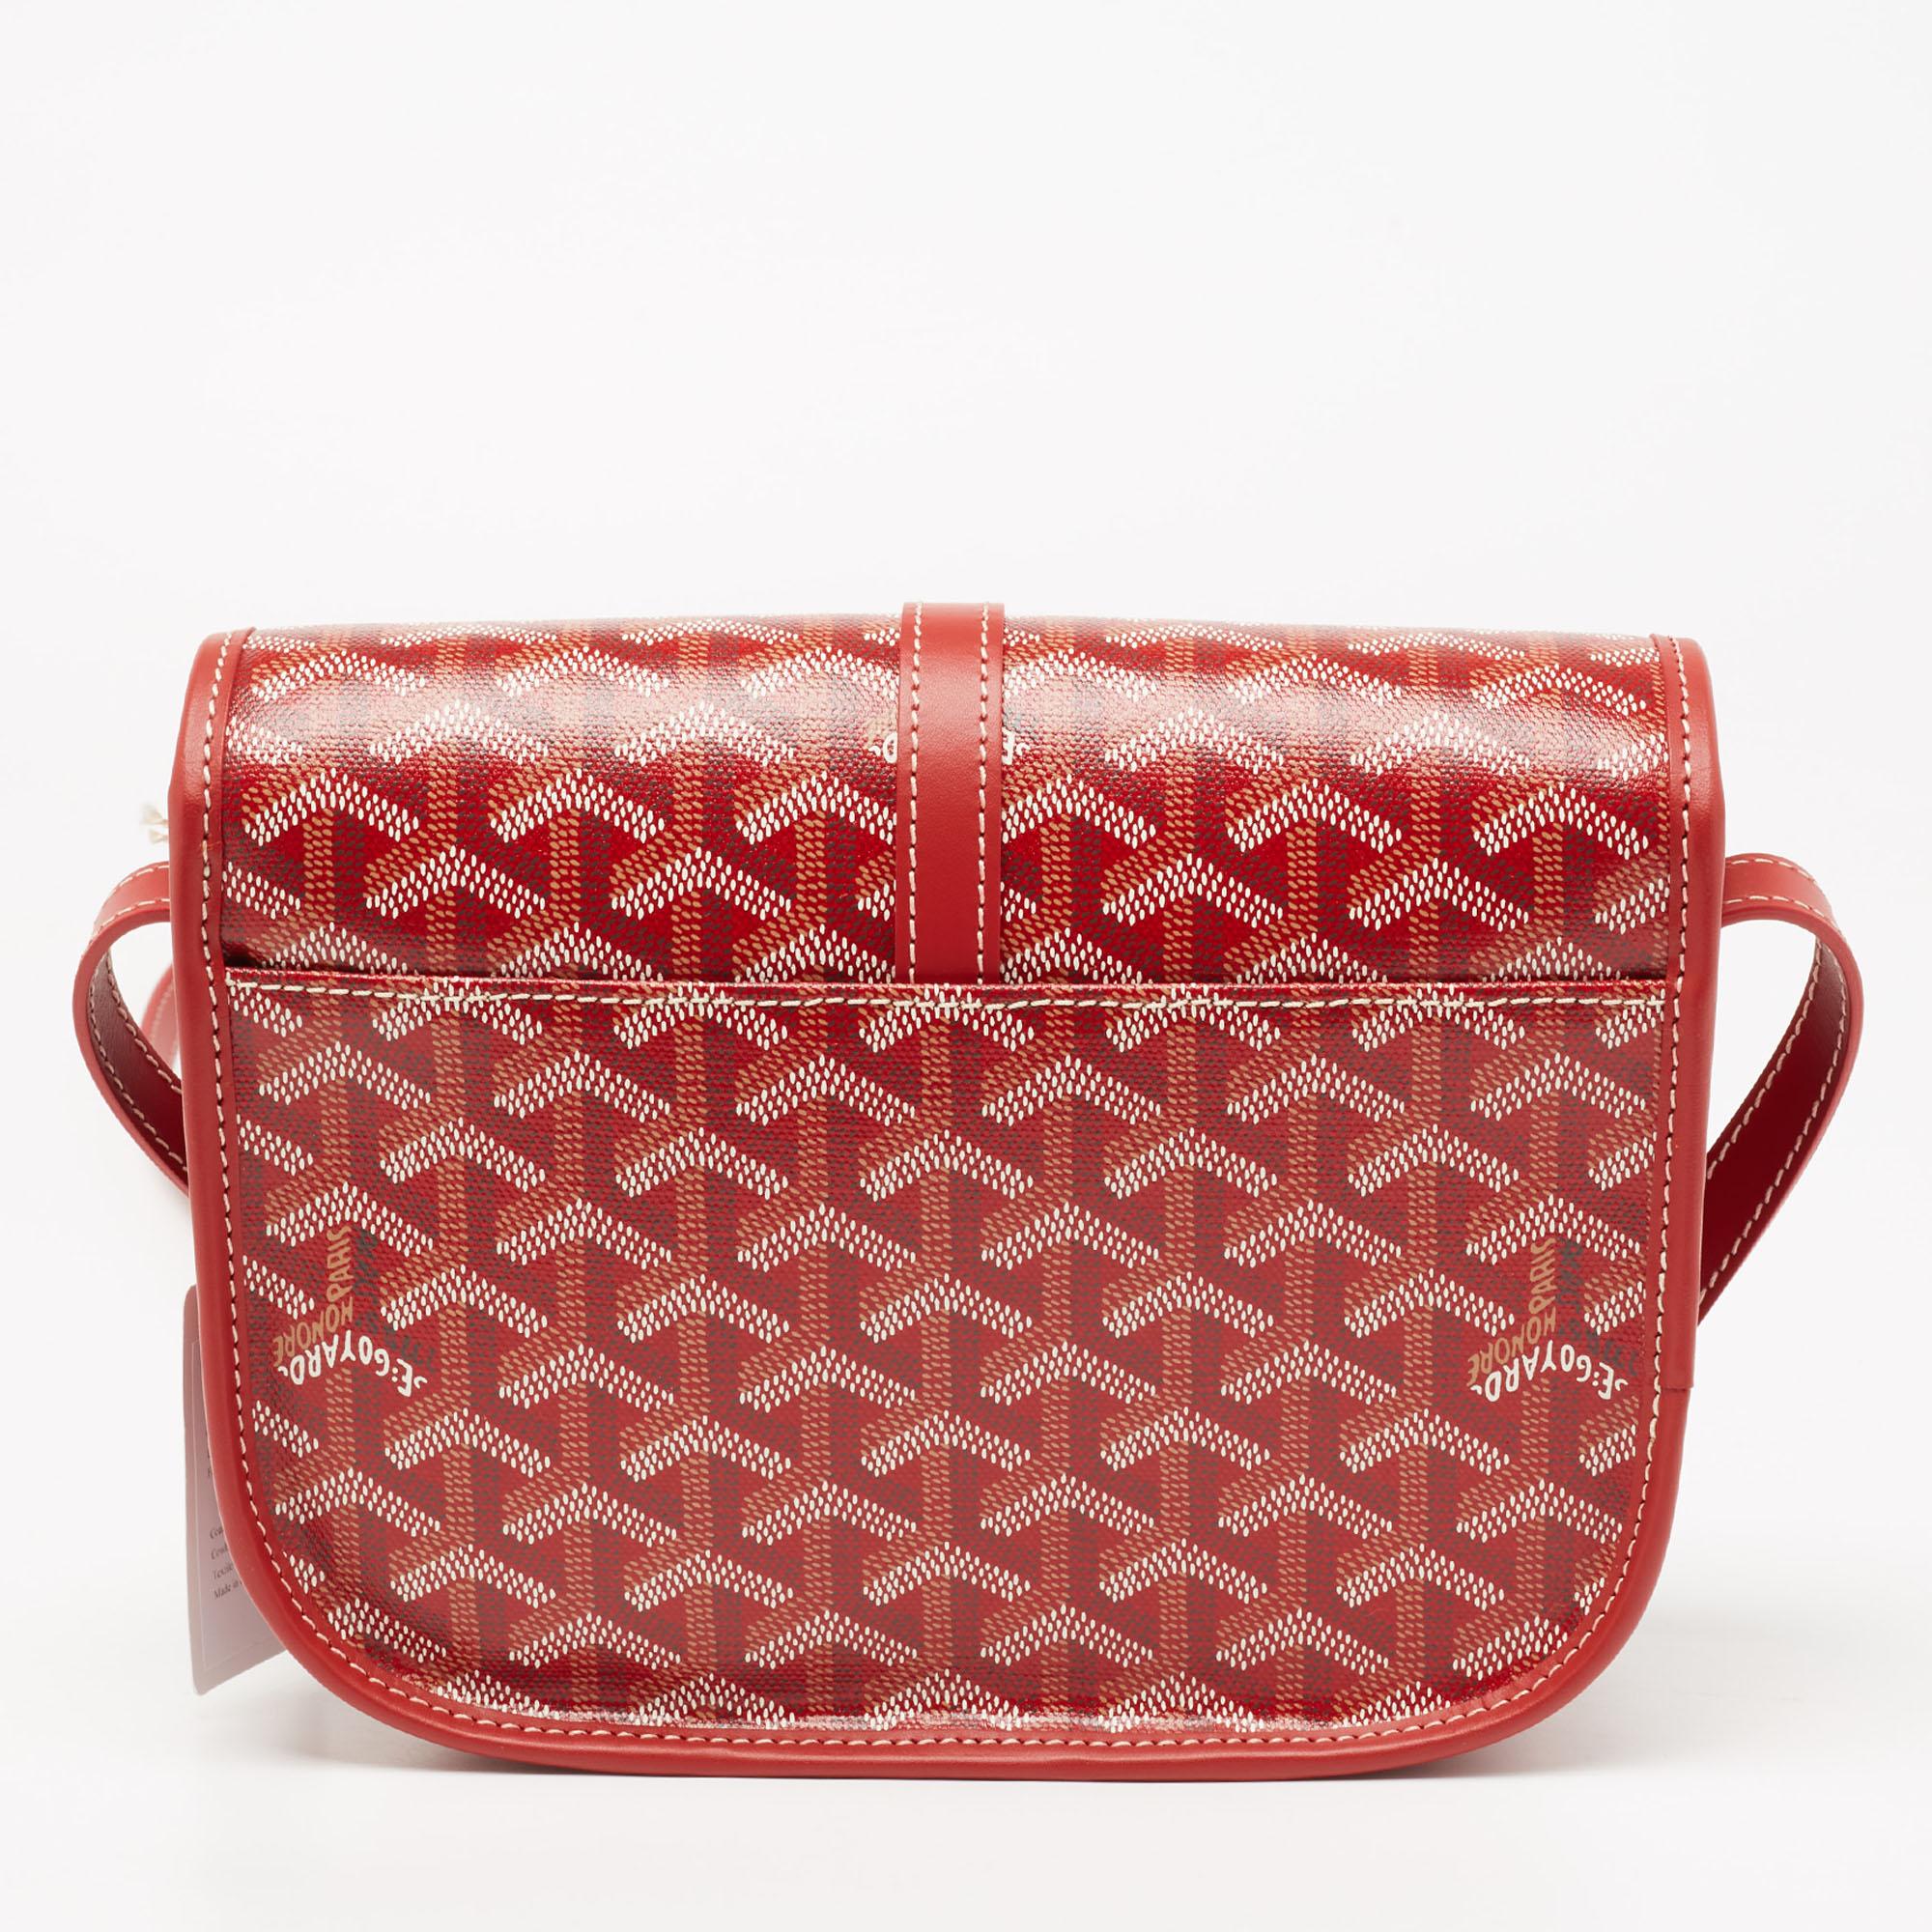 This Goyard Belvedere bag brings a smart design! Crafted in Goyardine canvas & leather, the bag features an iconic look, an adjustable leather strap, and silver-tone hardware. Lined in canvas, the red bag opens to a spacious interior to keep all